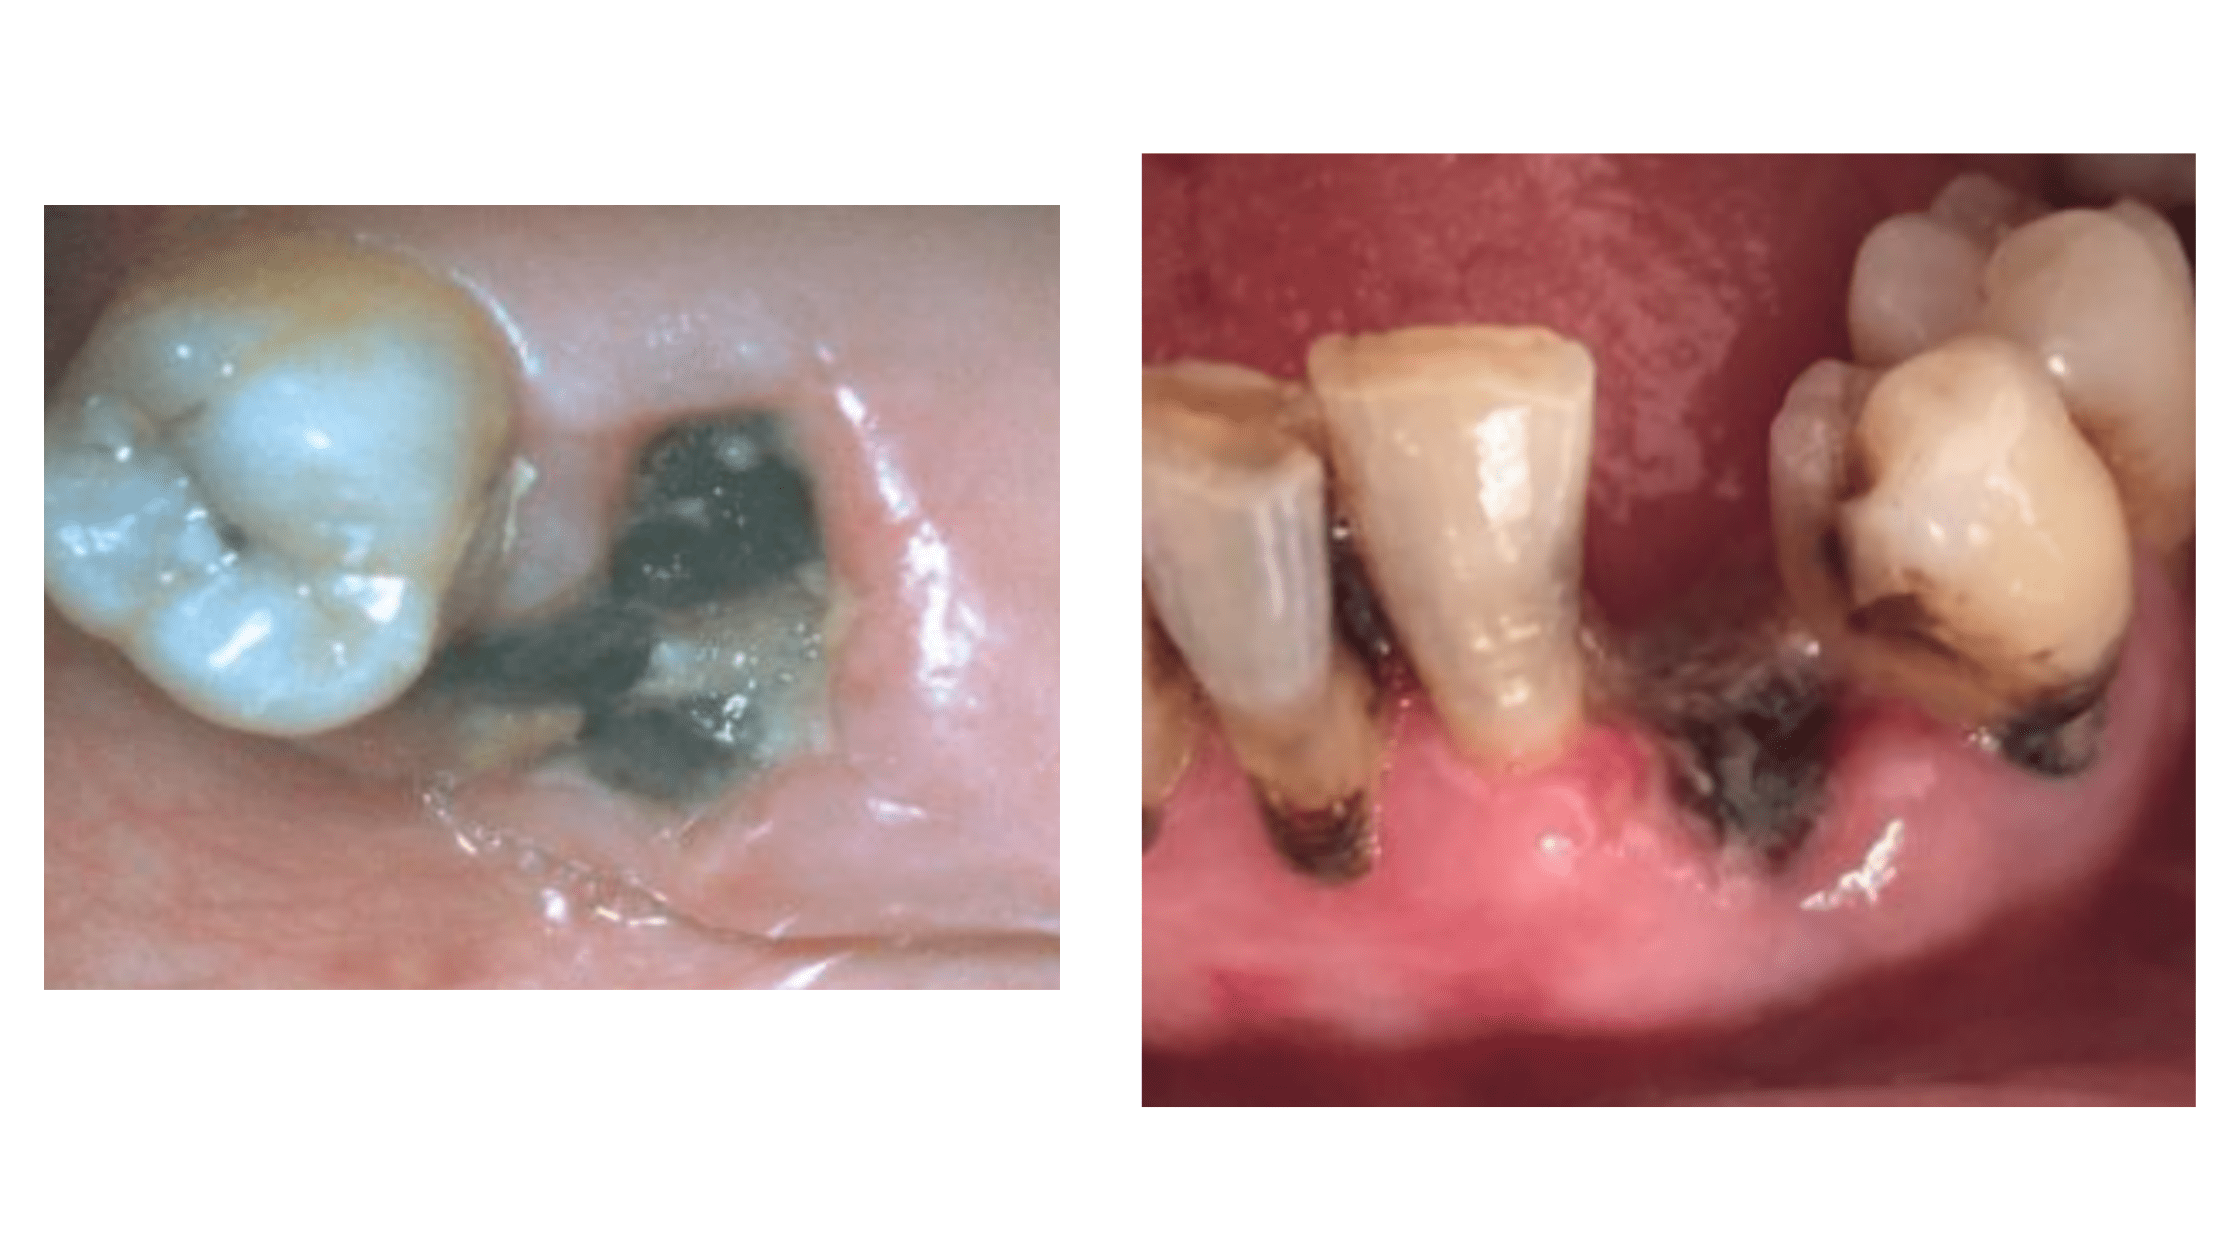 Socket infection after tooth extraction: Clinical images